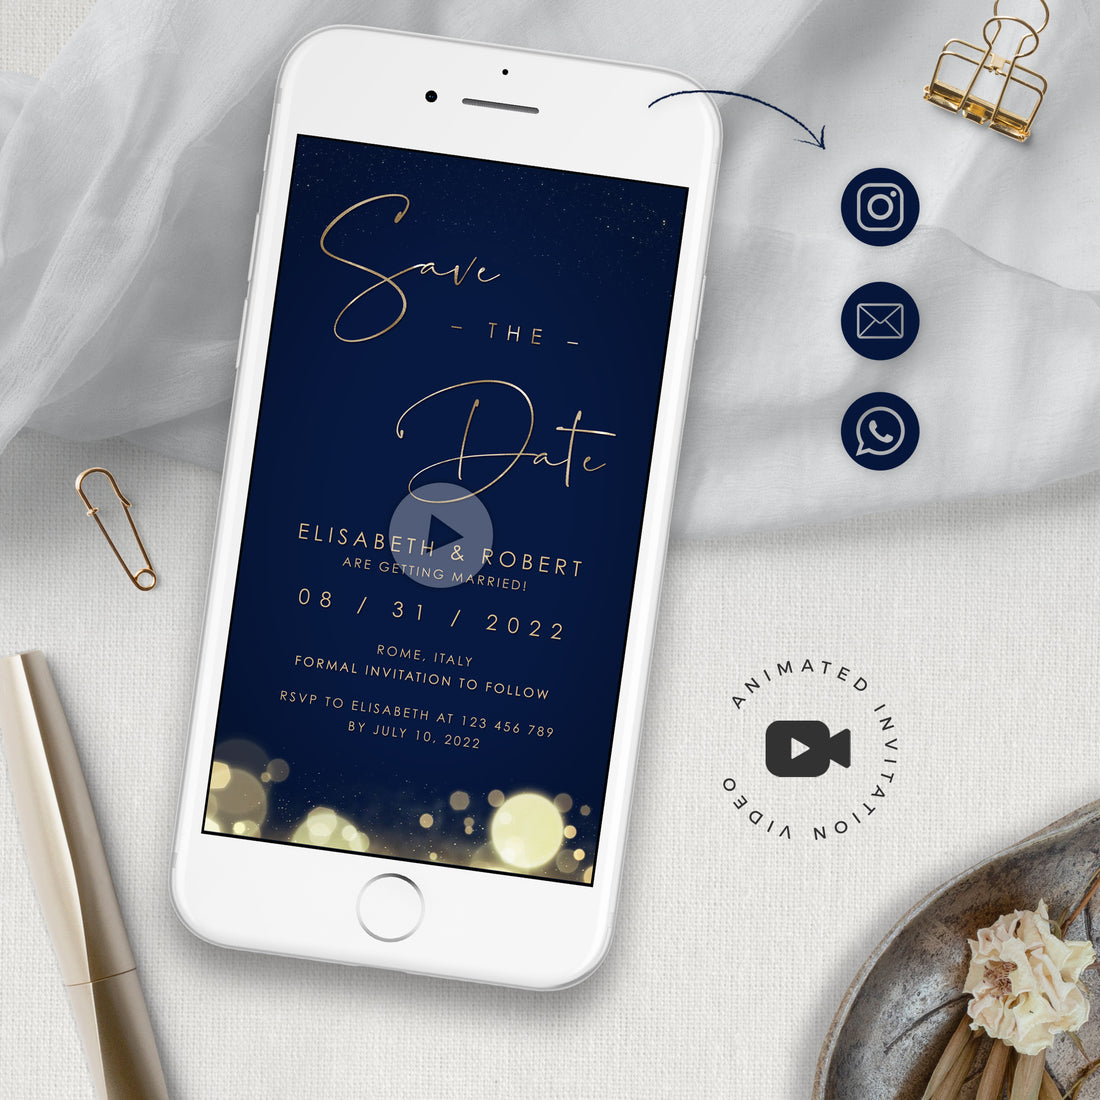 Anita | Blue Navy Animated Save the Date